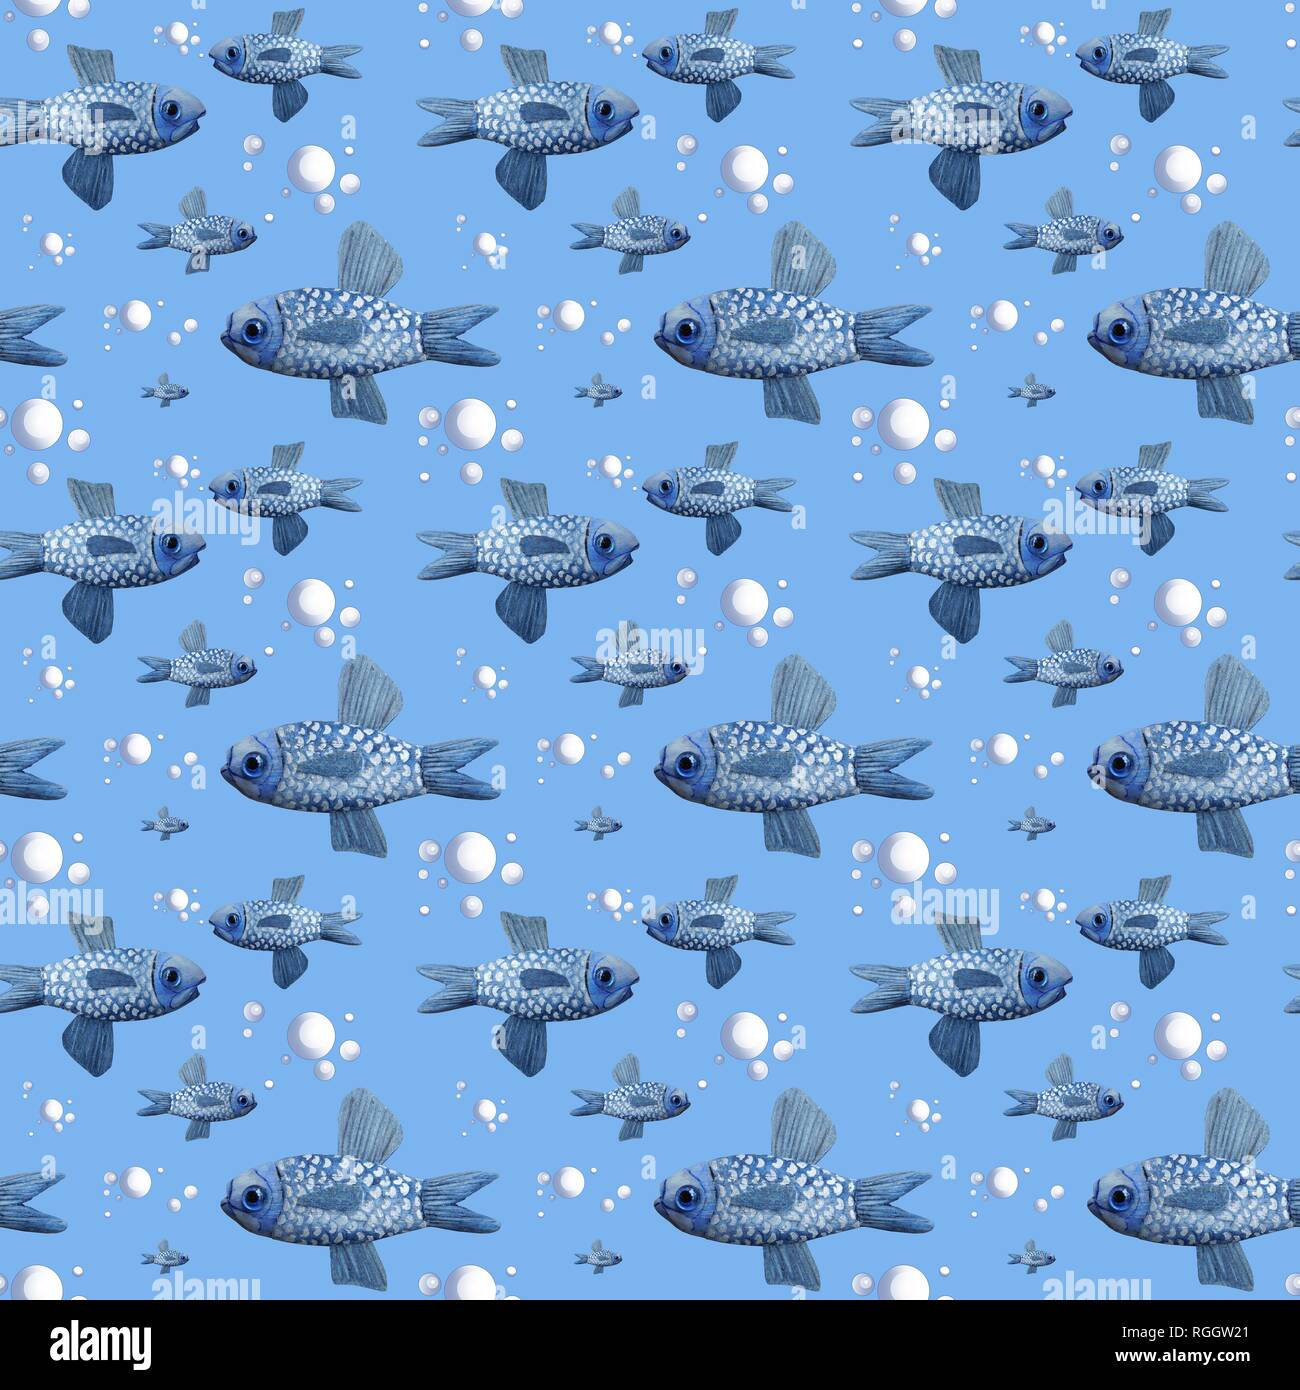 Wallpaper, wrapping paper, seamless pattern, fish with bubbles, background blue, Germany Stock Photo